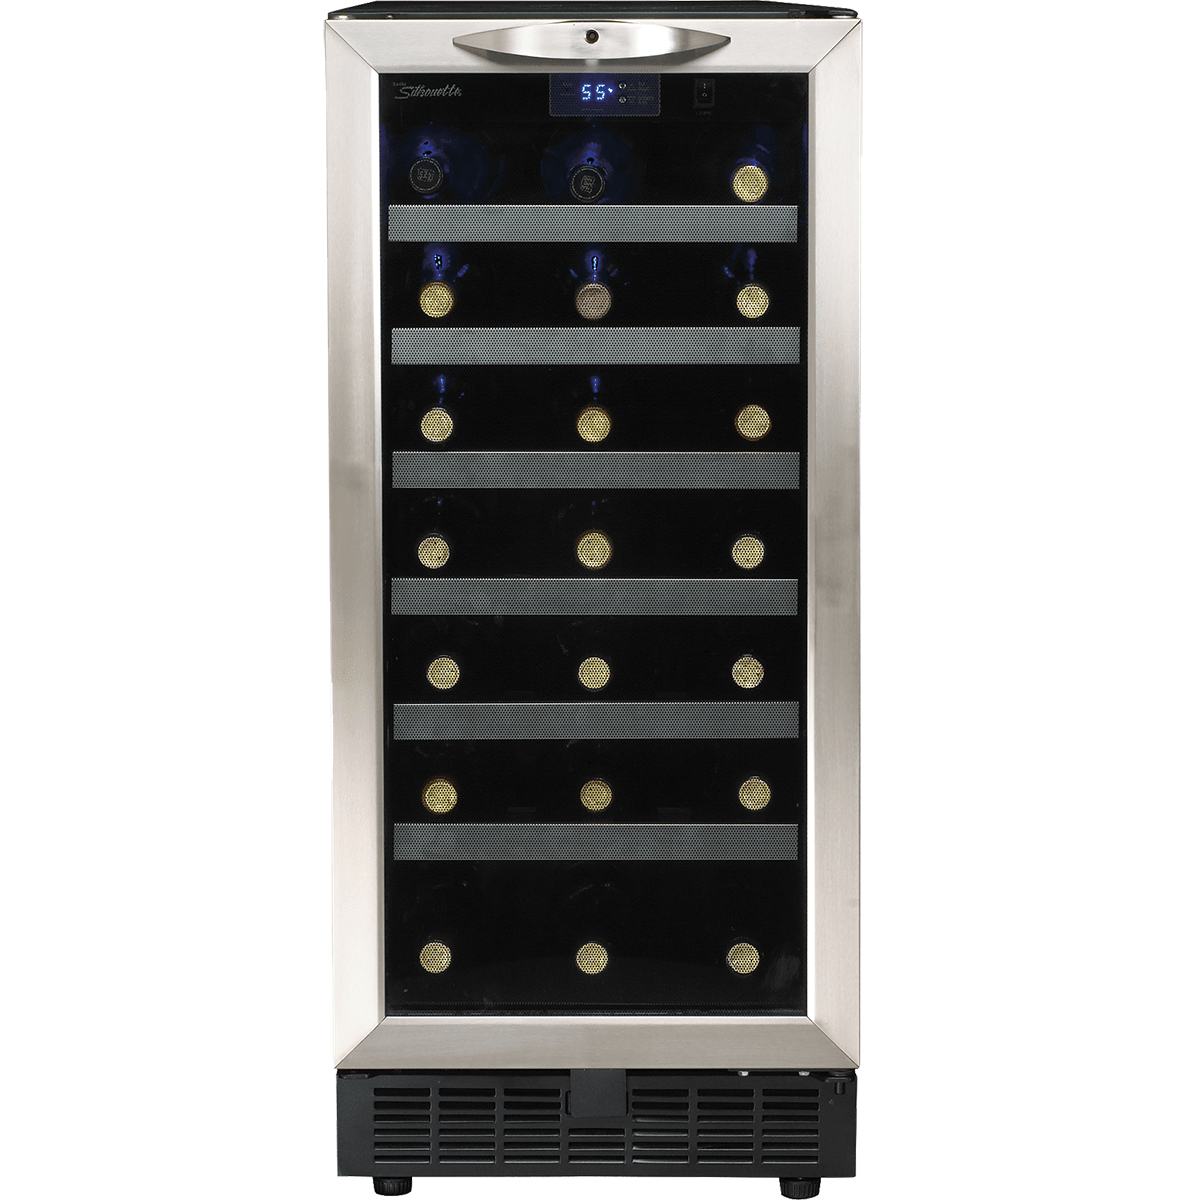 Danby Silhouette Cheshire 34 Bottle Wine Cooler